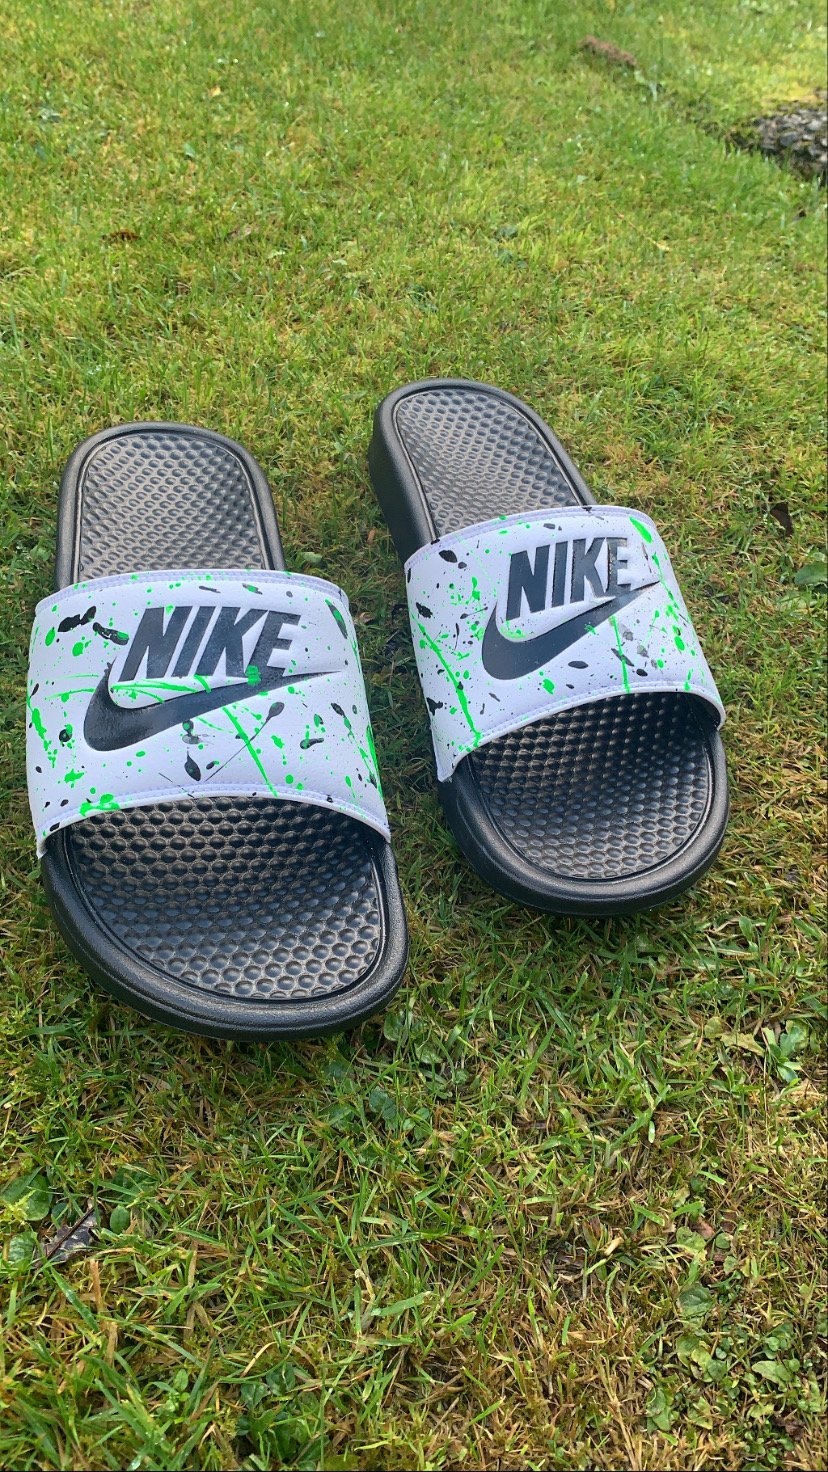 Nike slides neon green and black paint 